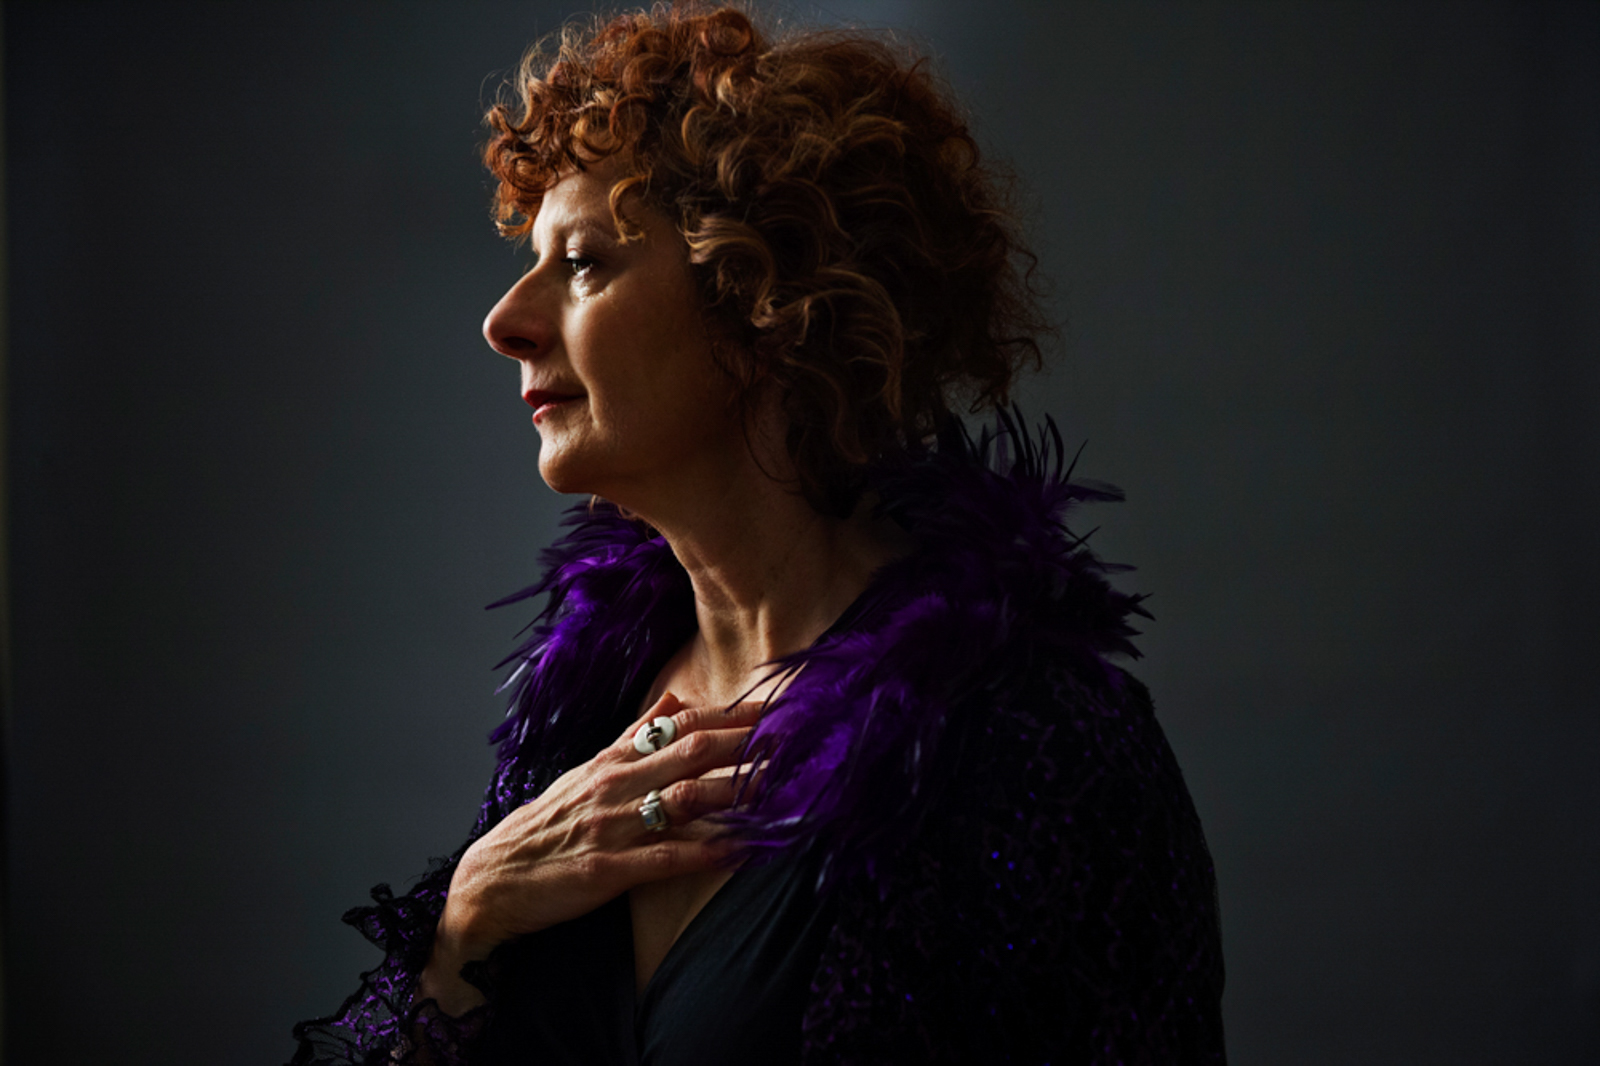 Portrait of woman with red hair and purple coat looking pensive